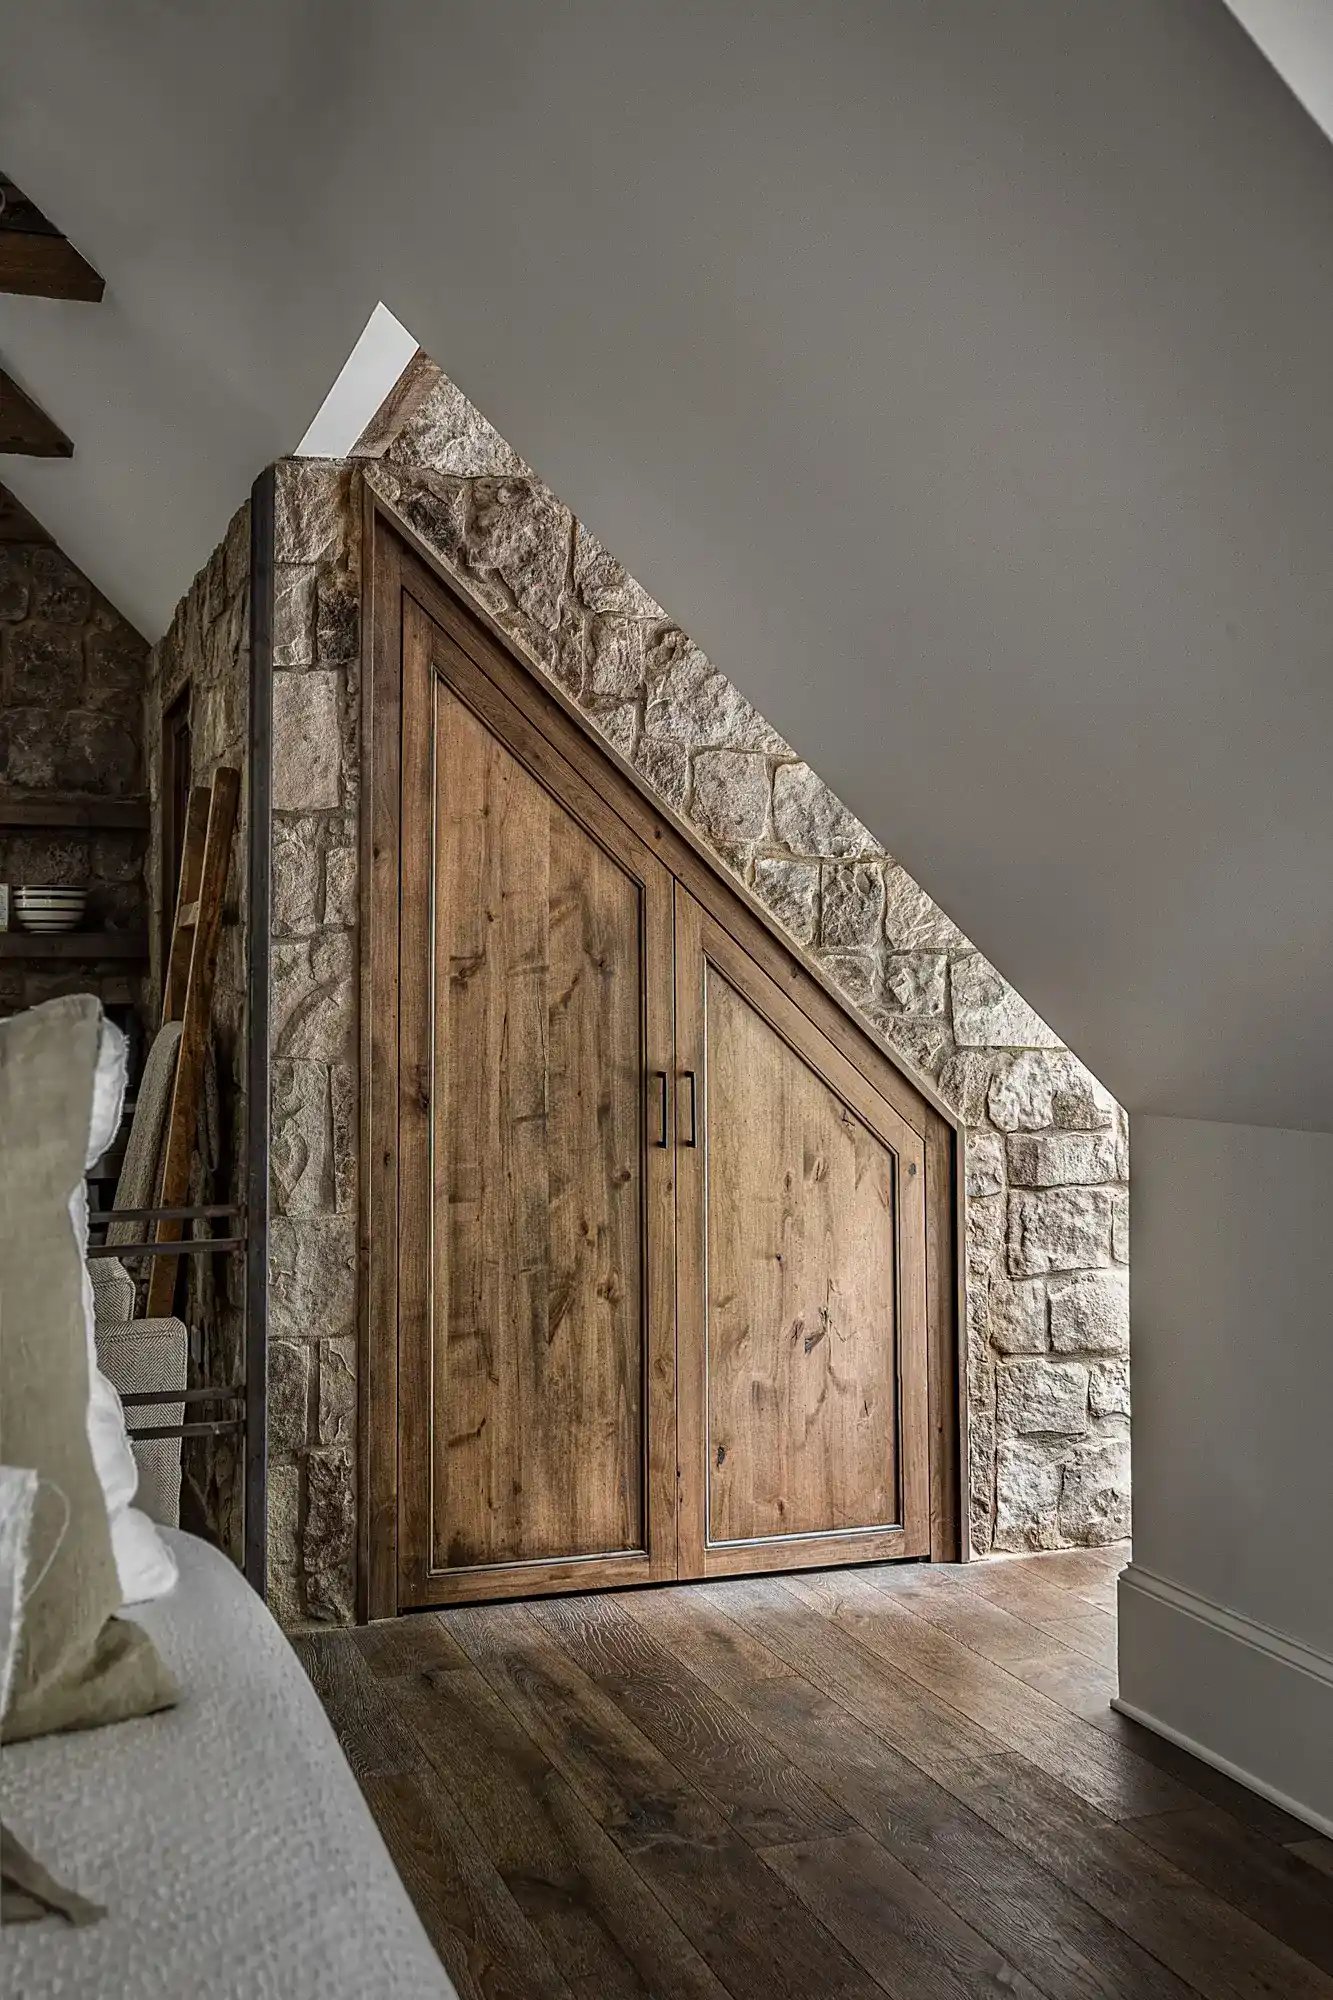 Attic bedroom with custom wooden storage doors set into a stone wall, complementing the hardwood floors.